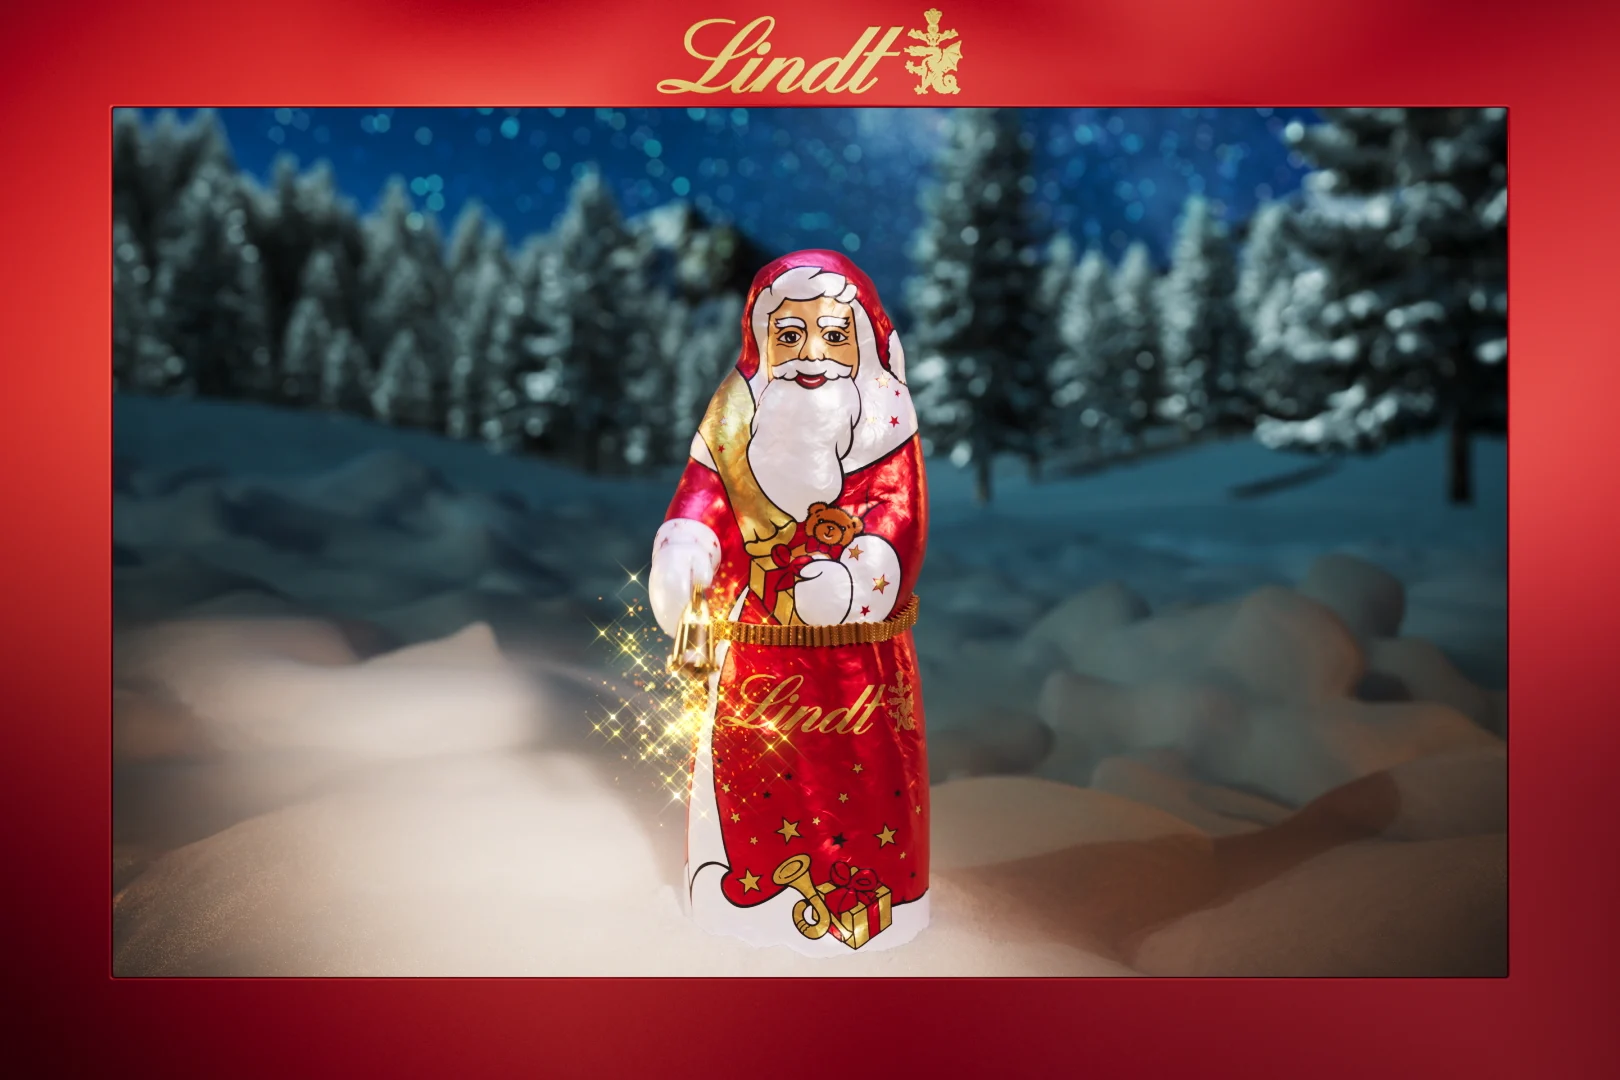 we see a chocolate Santa Claus in a snowy environment and a red frame and the picture